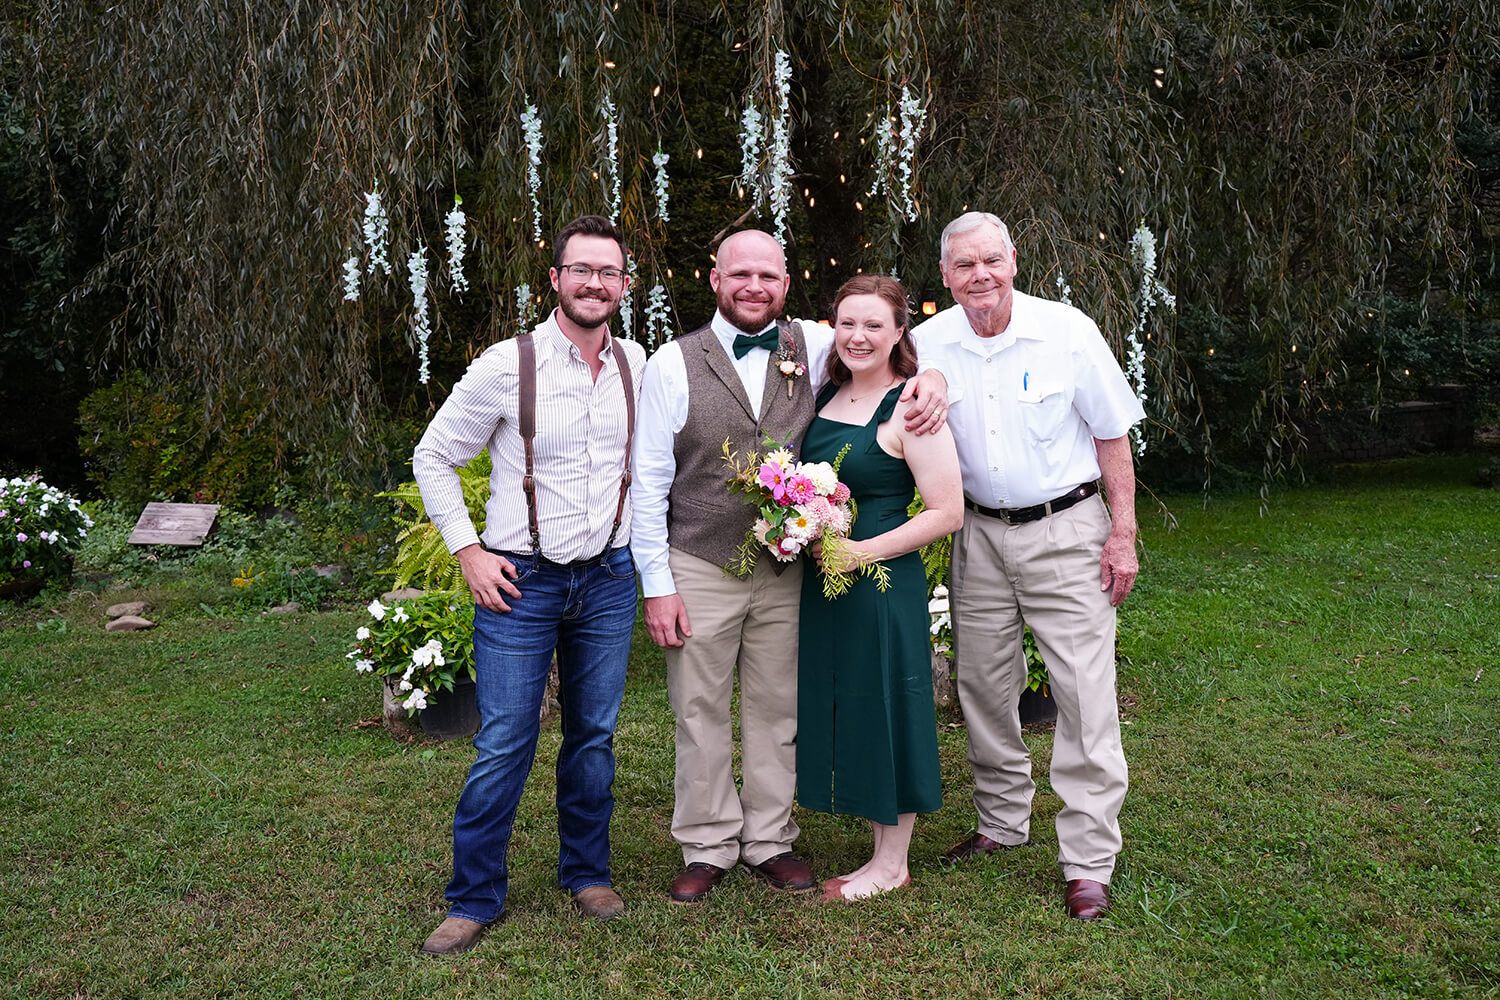 Small group of four getting married at the willow tree at Honeysuckle Hills in Pigeon Forge Tennessee